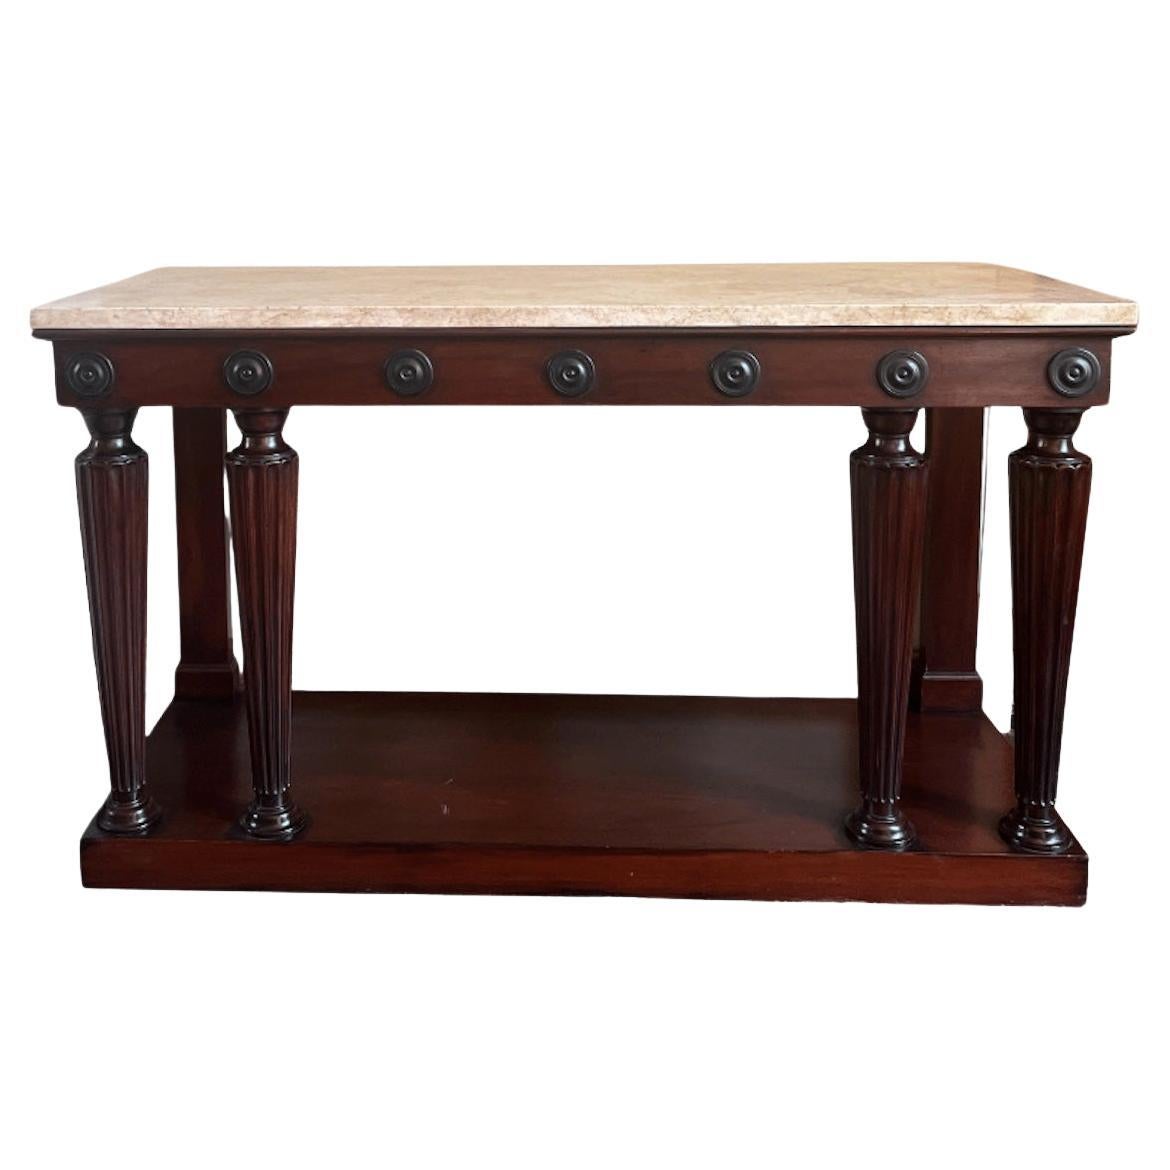 The George Smith Console